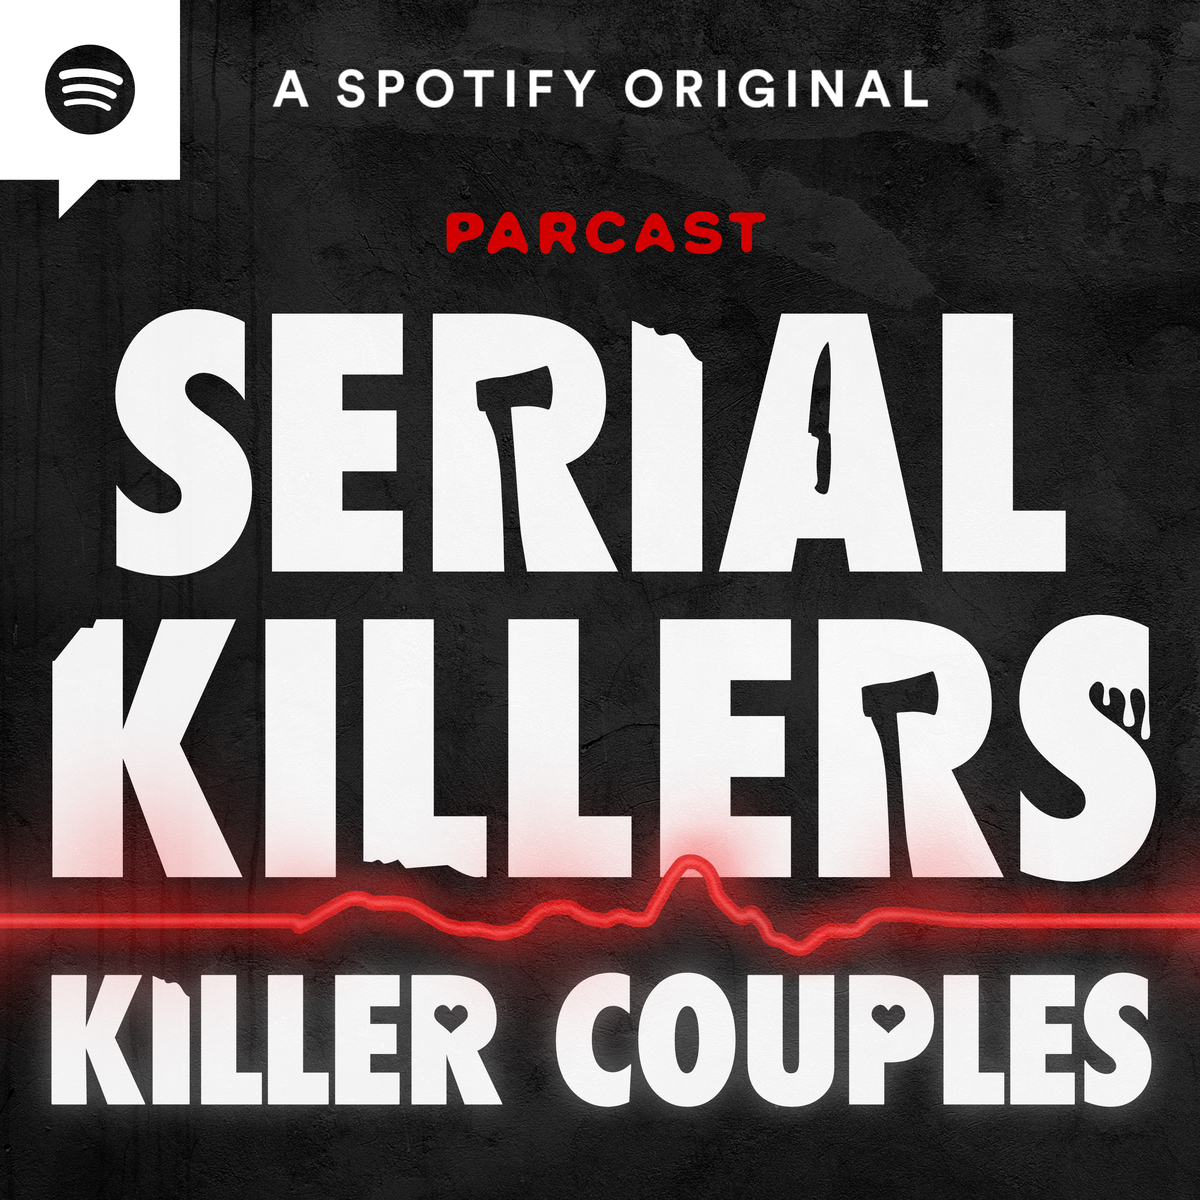 6 True Crime Series and Podcasts You Don't Want to Miss This February